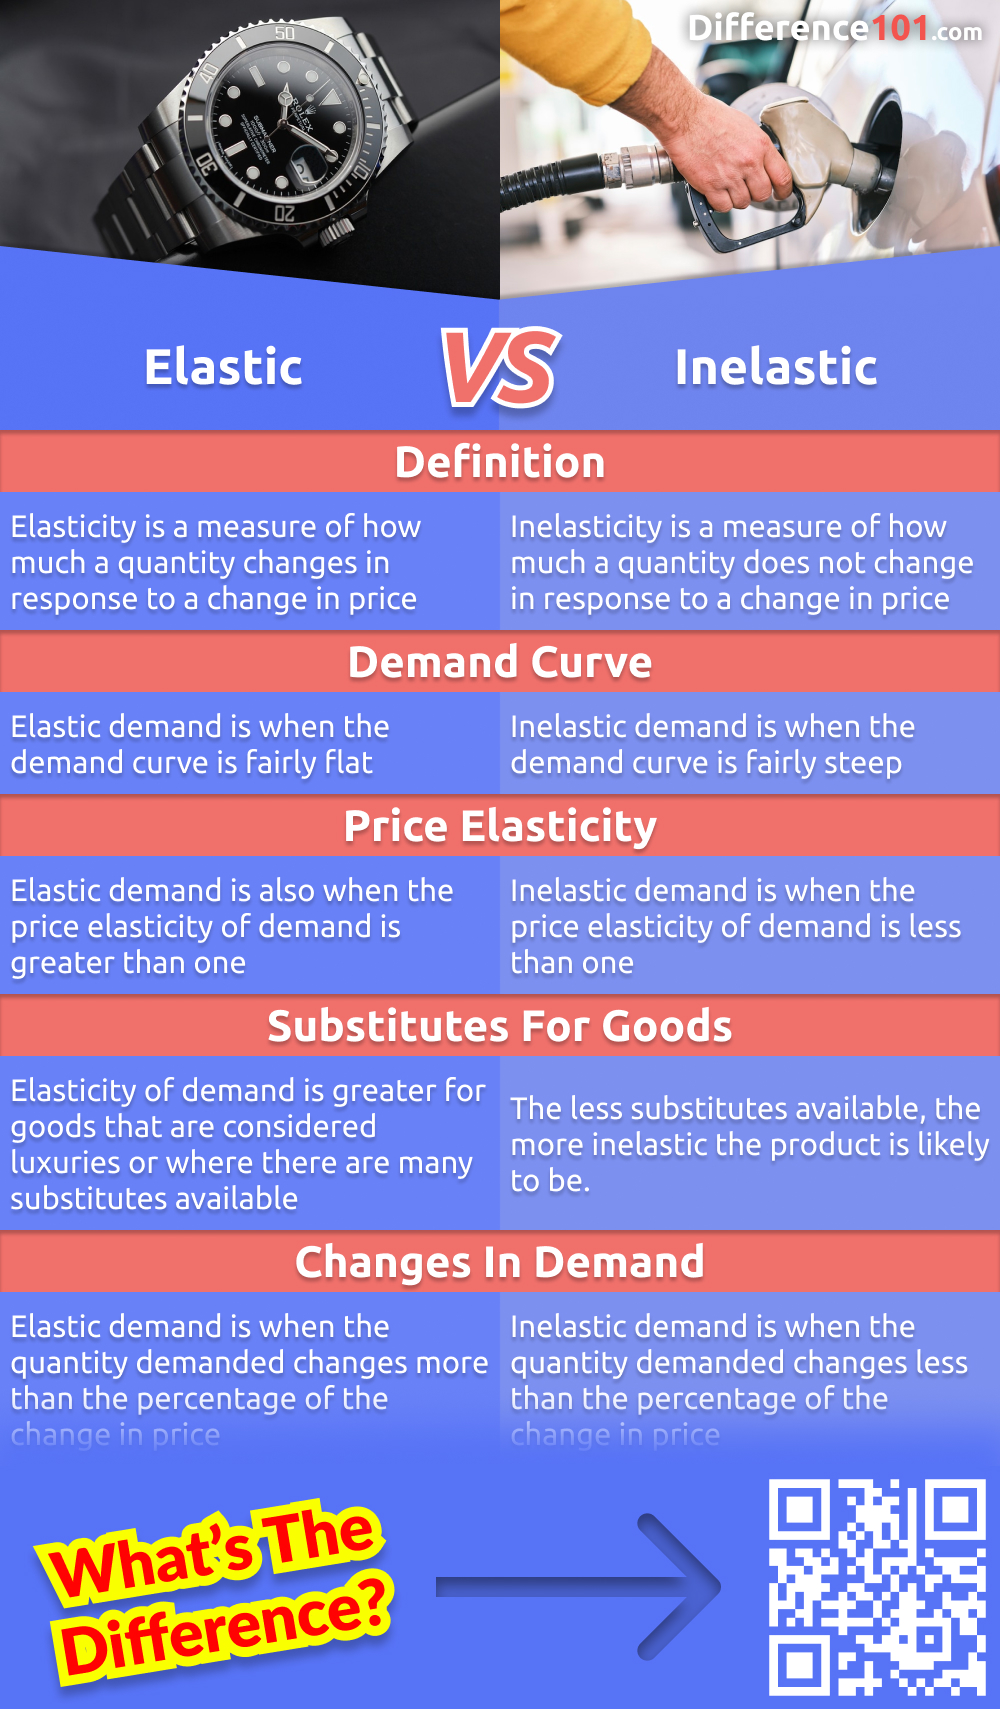 Elastic and inelastic are two terms used in economics to describe how demand for a good or service changes in relation to price changes. But what are the differences between them? Read more here.